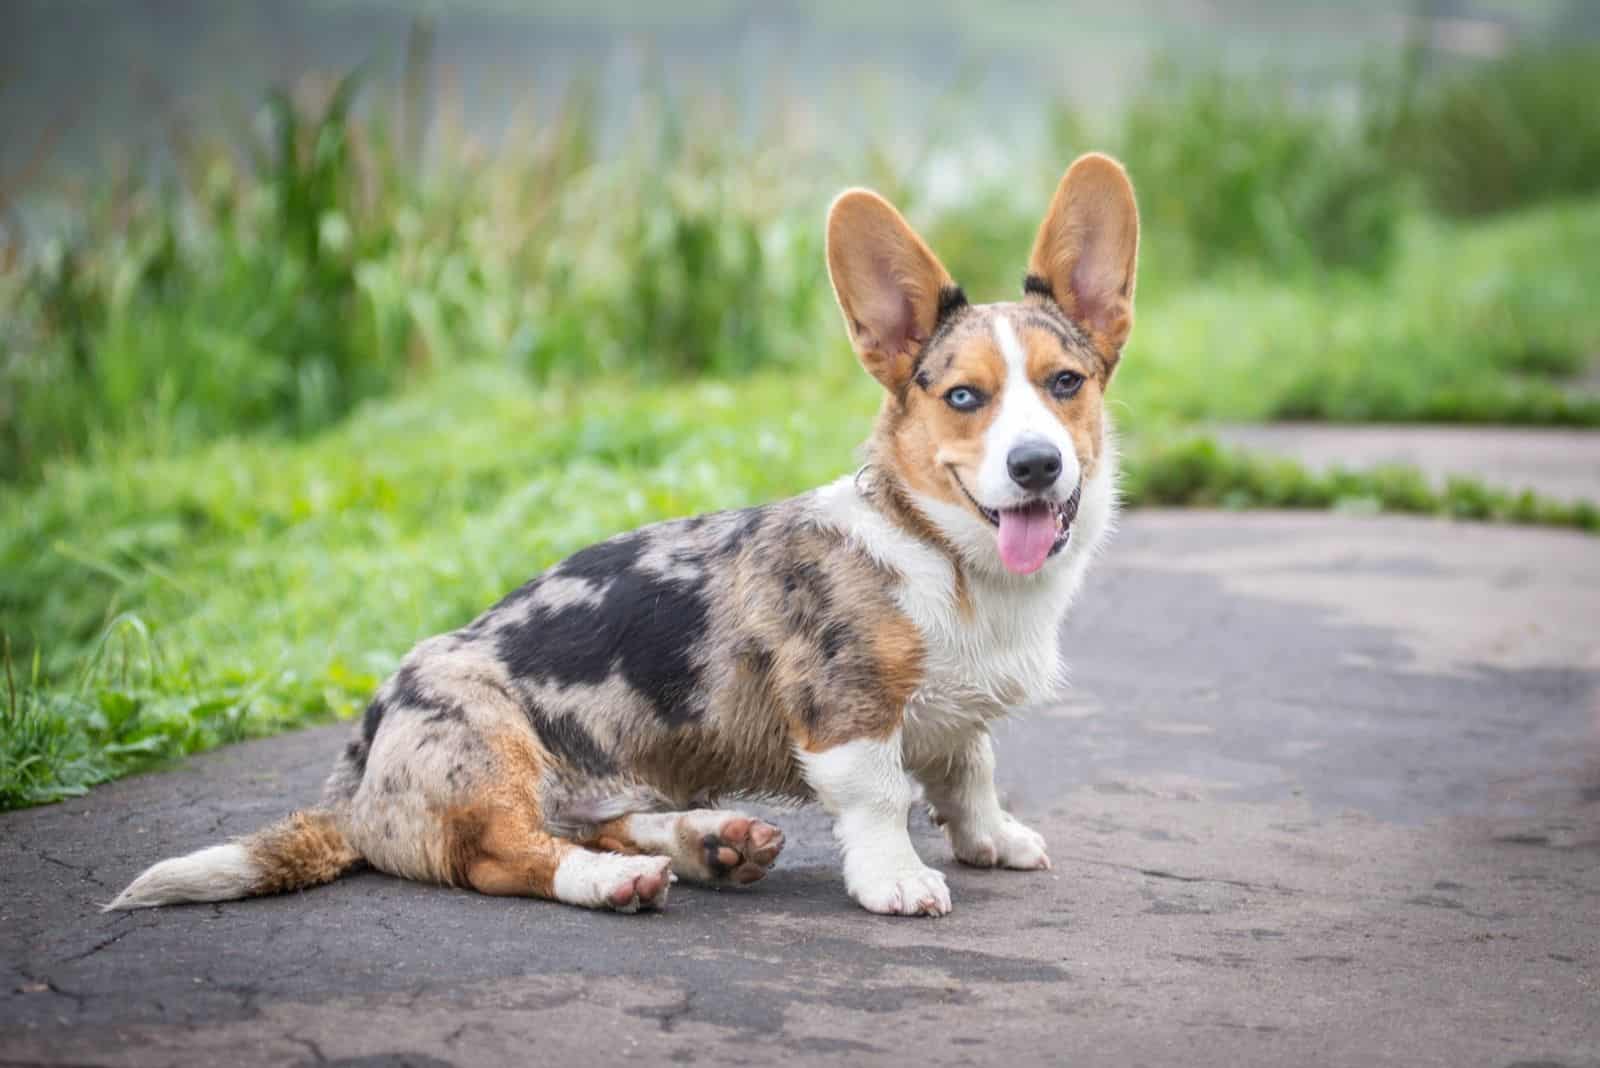 Cardigan Welsh Corgi puppy sitting on the road in summer